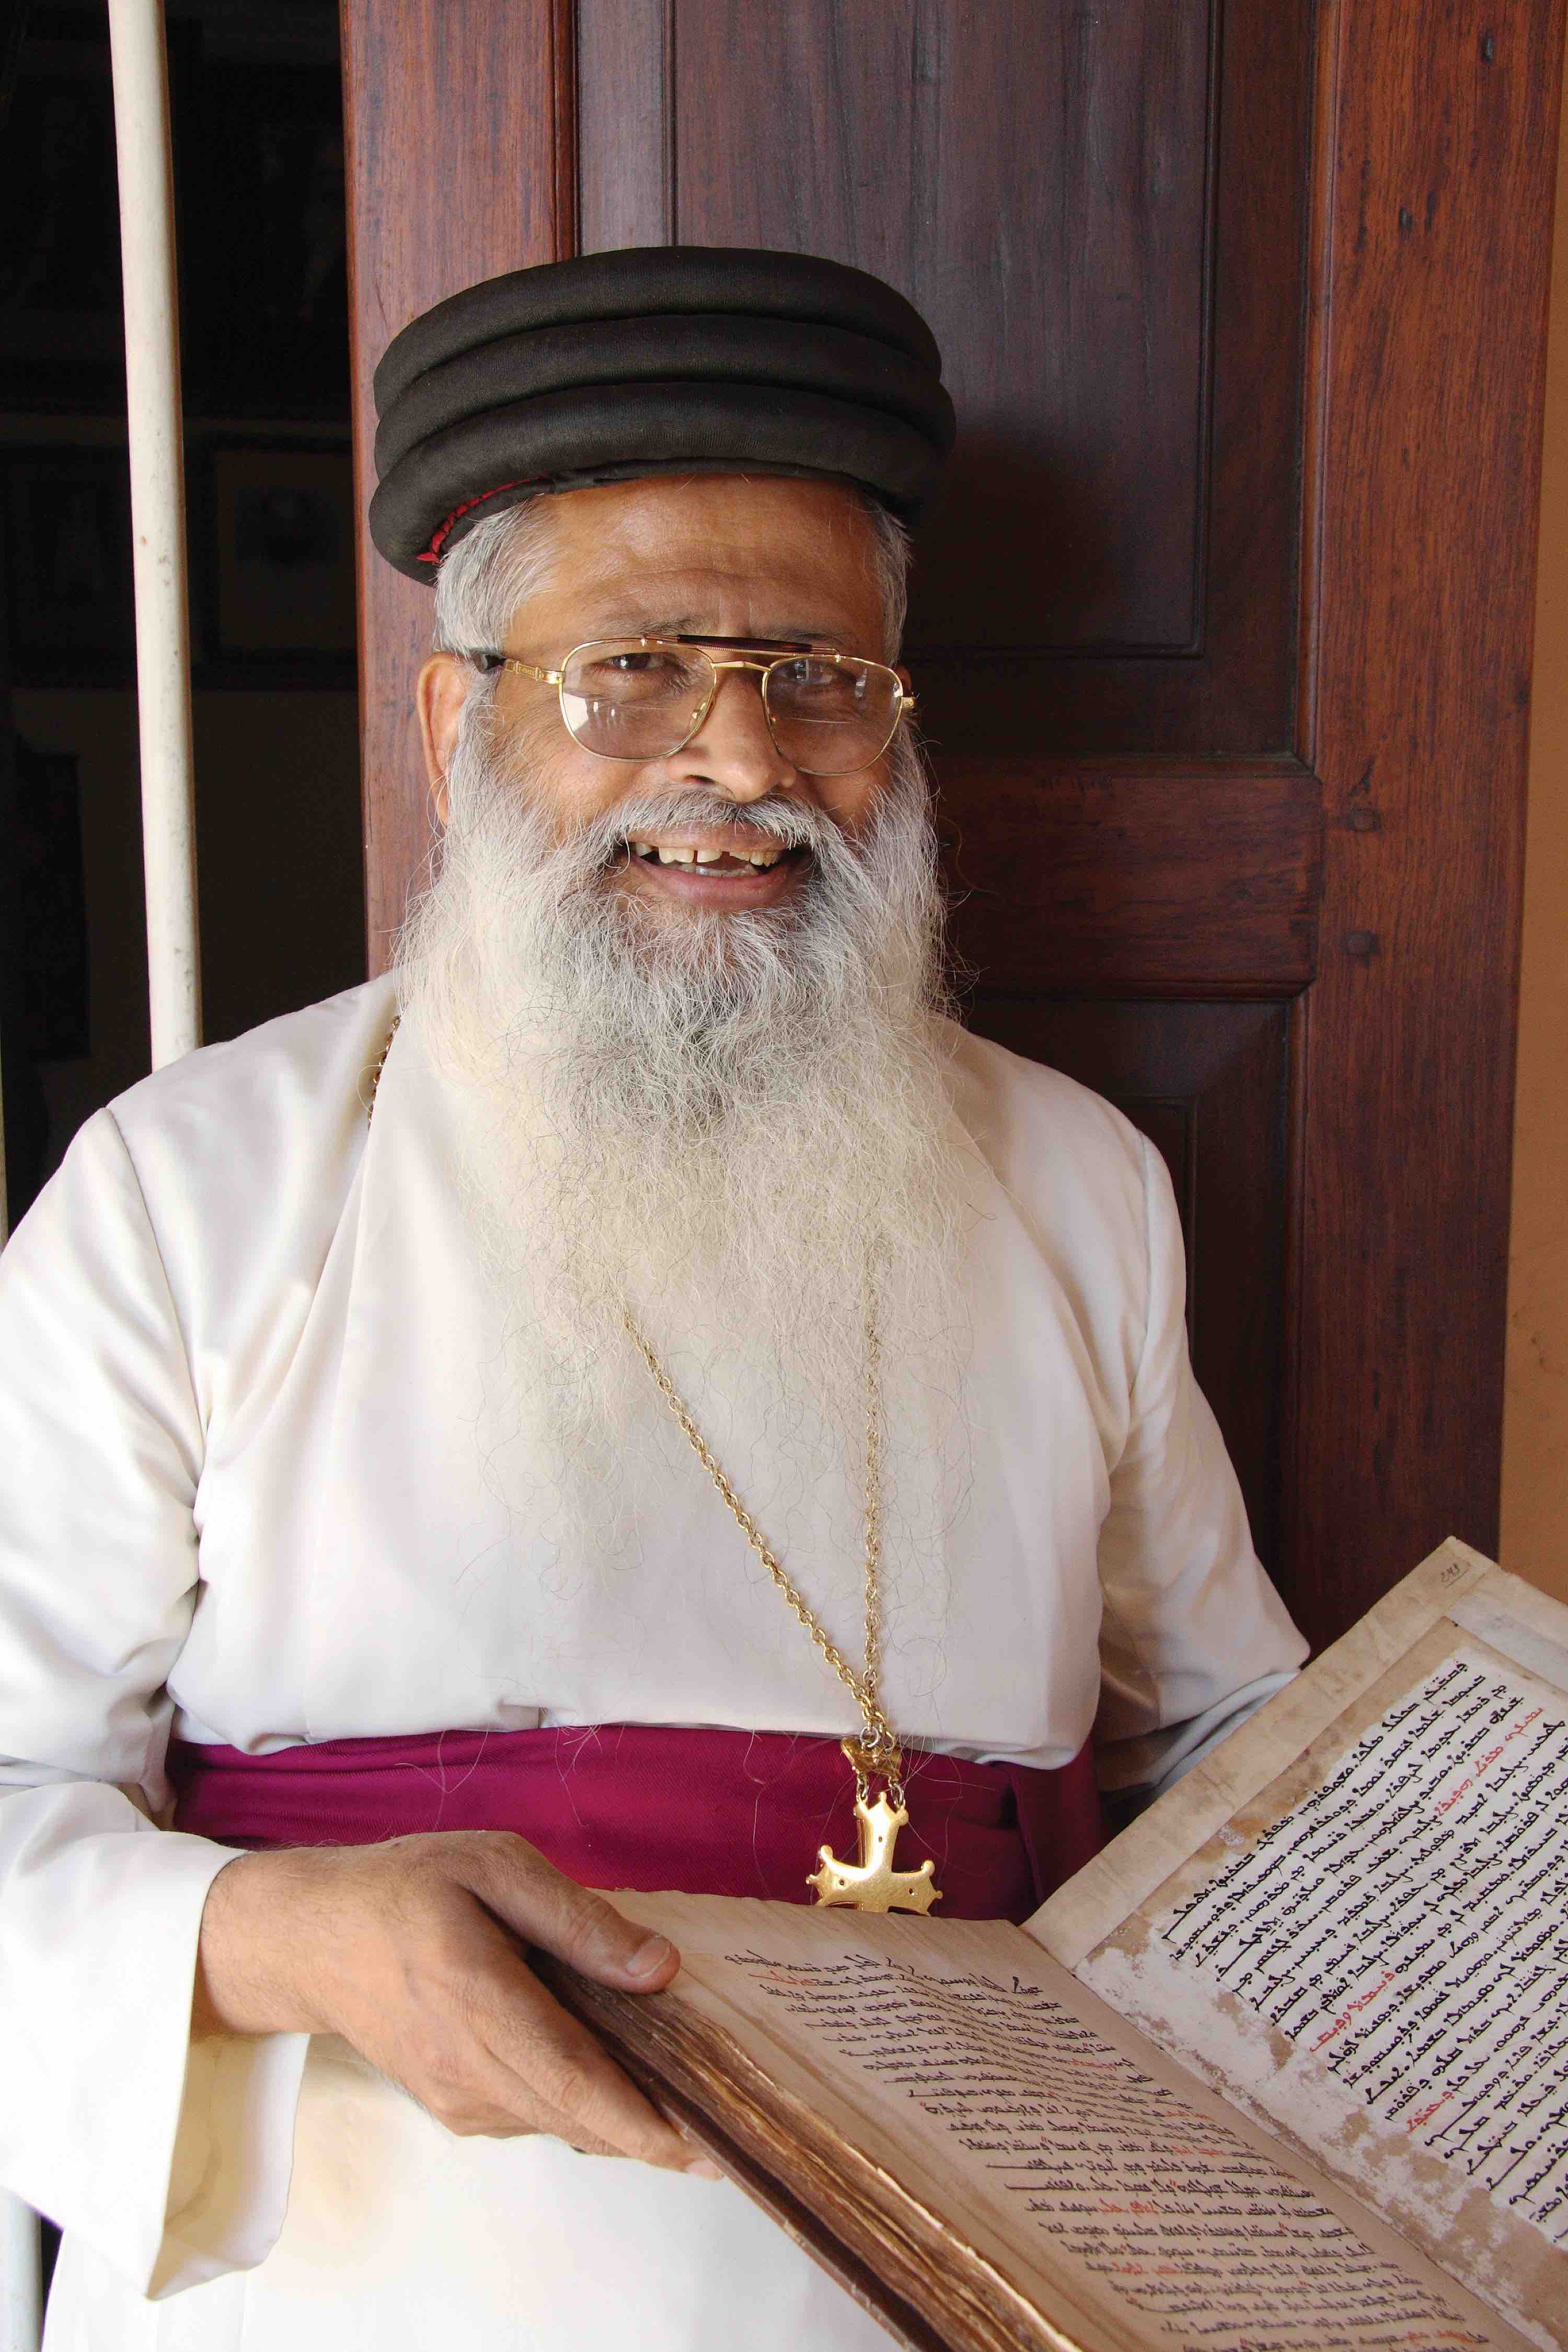 Mar Aprem Mooken, Chaldean (Assyrian Church of the East) Metropolitan of India, holding a Syriac manuscript from the collection of the Metropolitanate in Thrissur, India